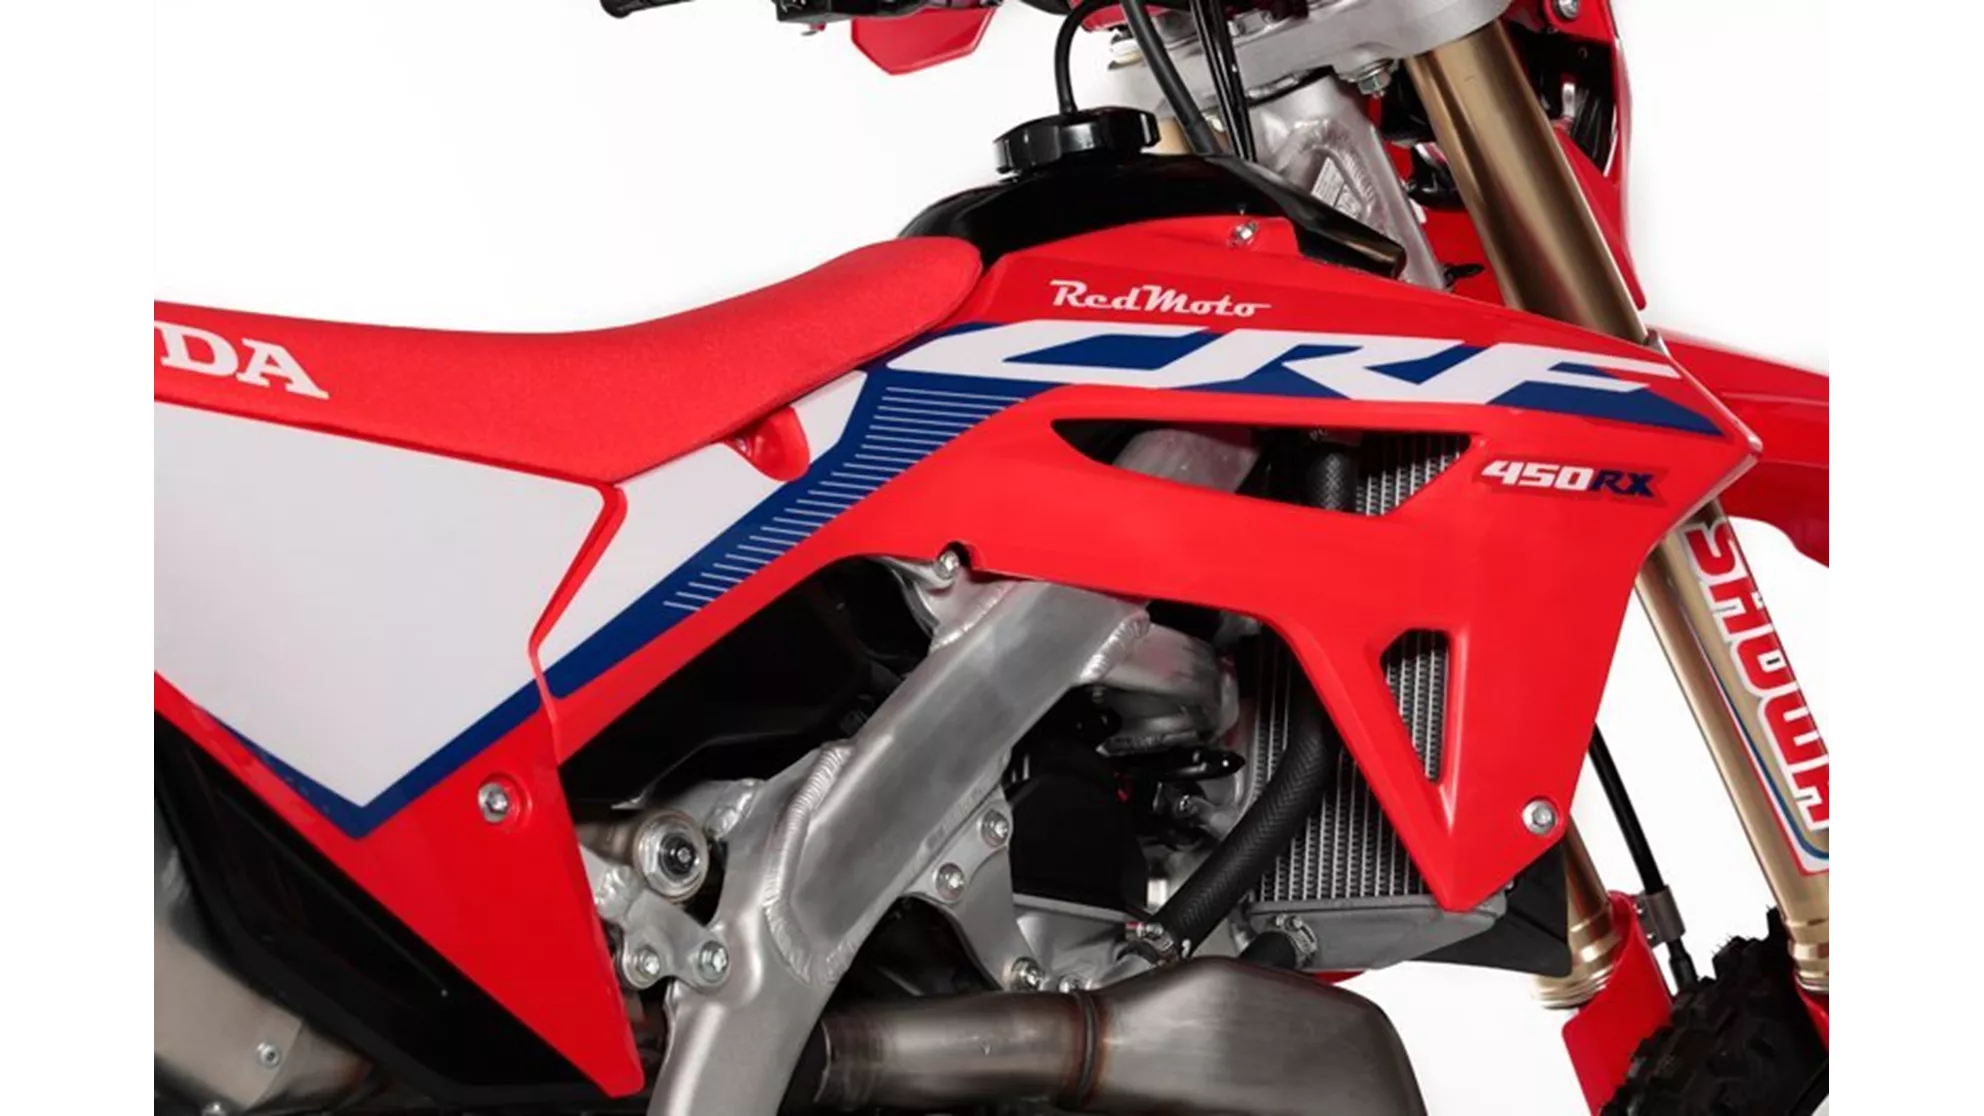 Red Moto CRF 450RX Enduro Special - Image 18